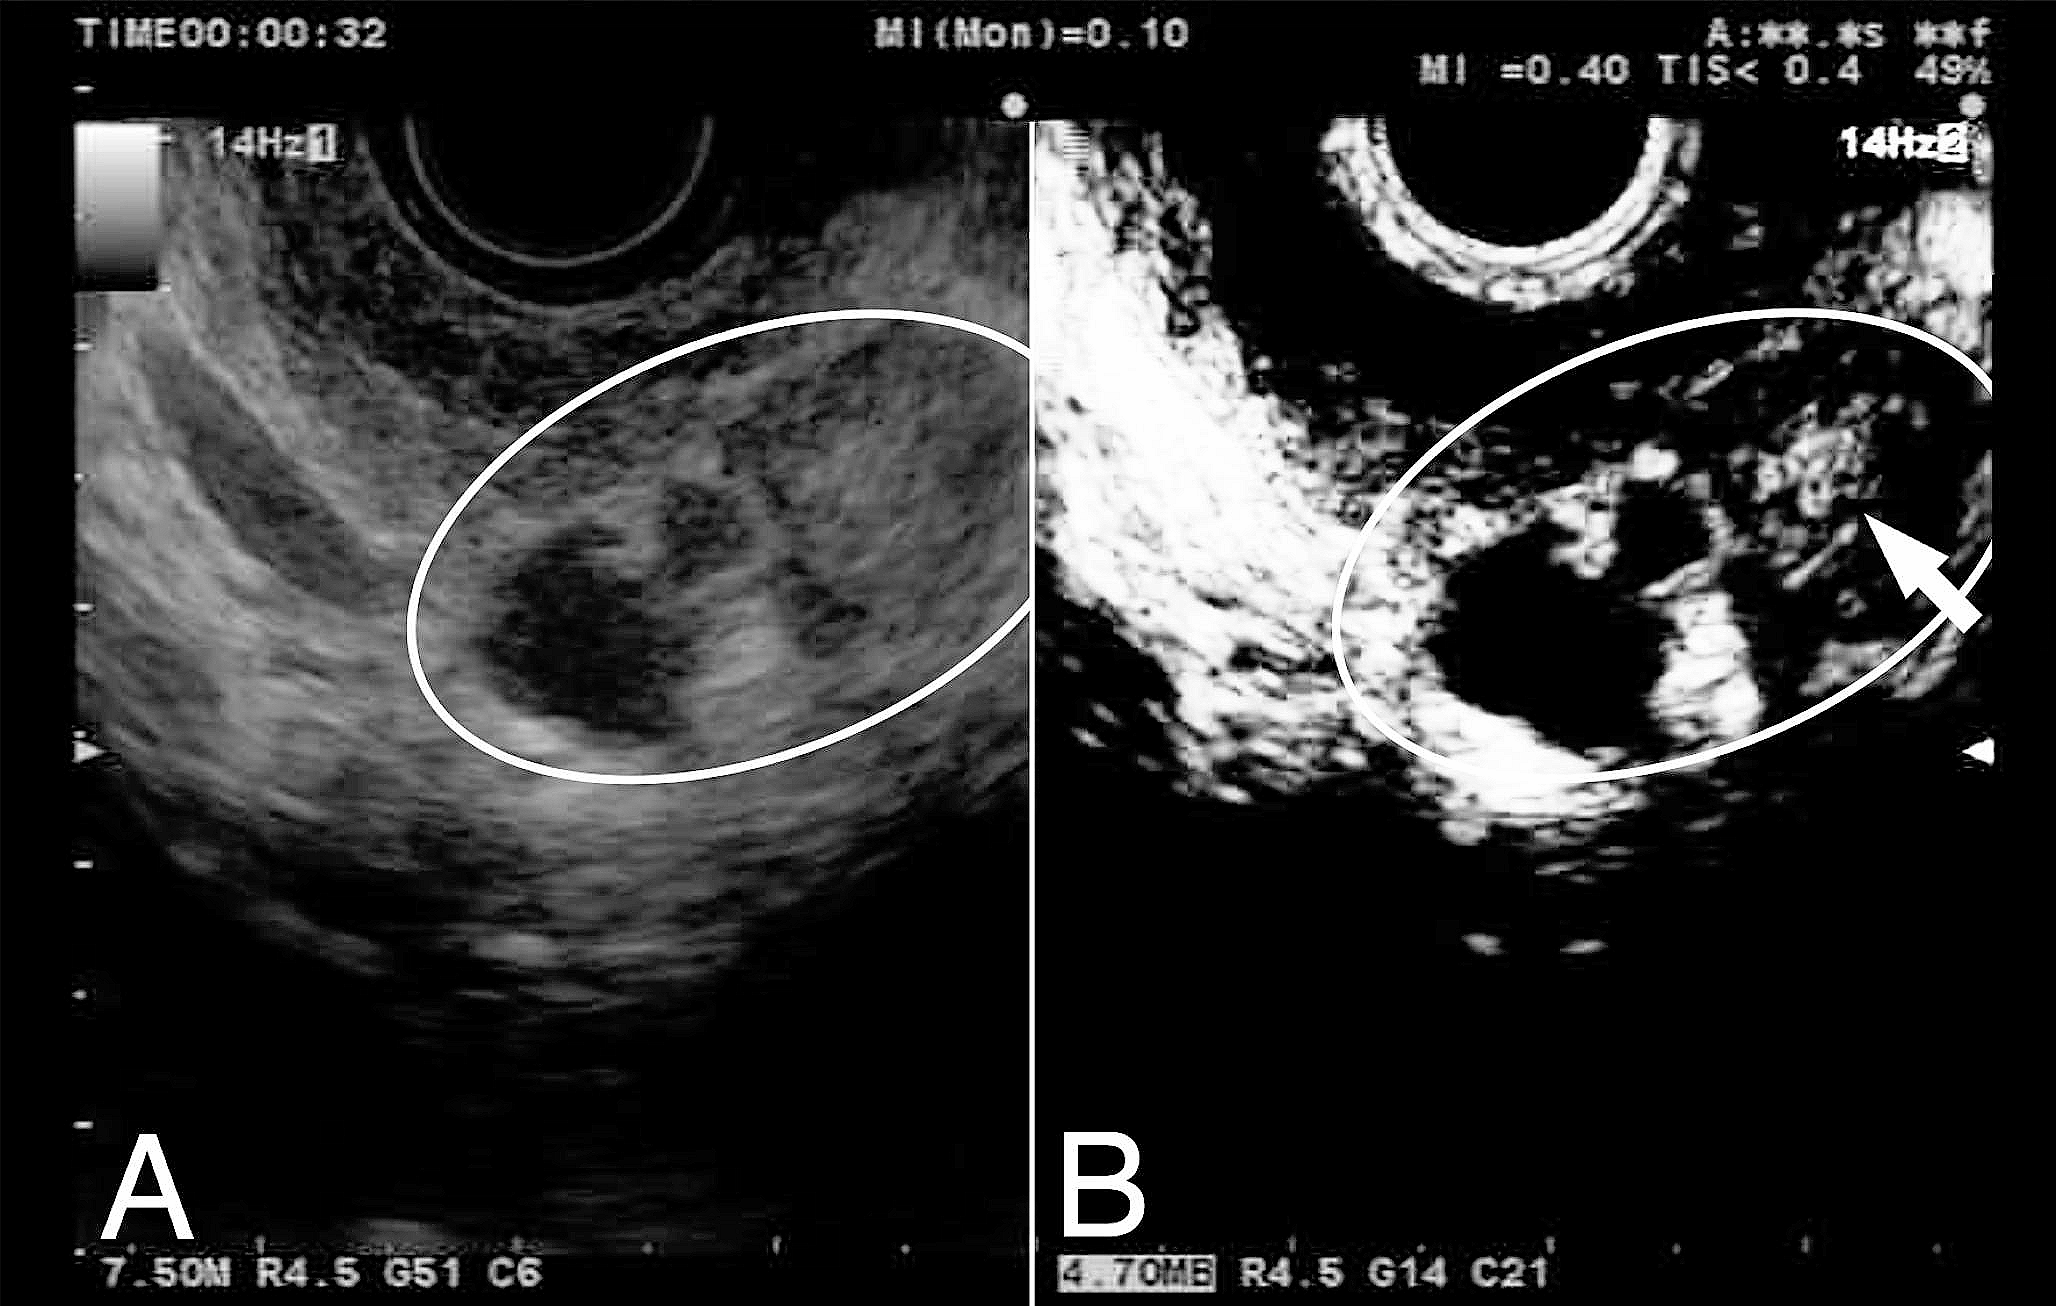 The role of endoscopic ultrasound in the detection of pancreatic lesions in high-risk individuals